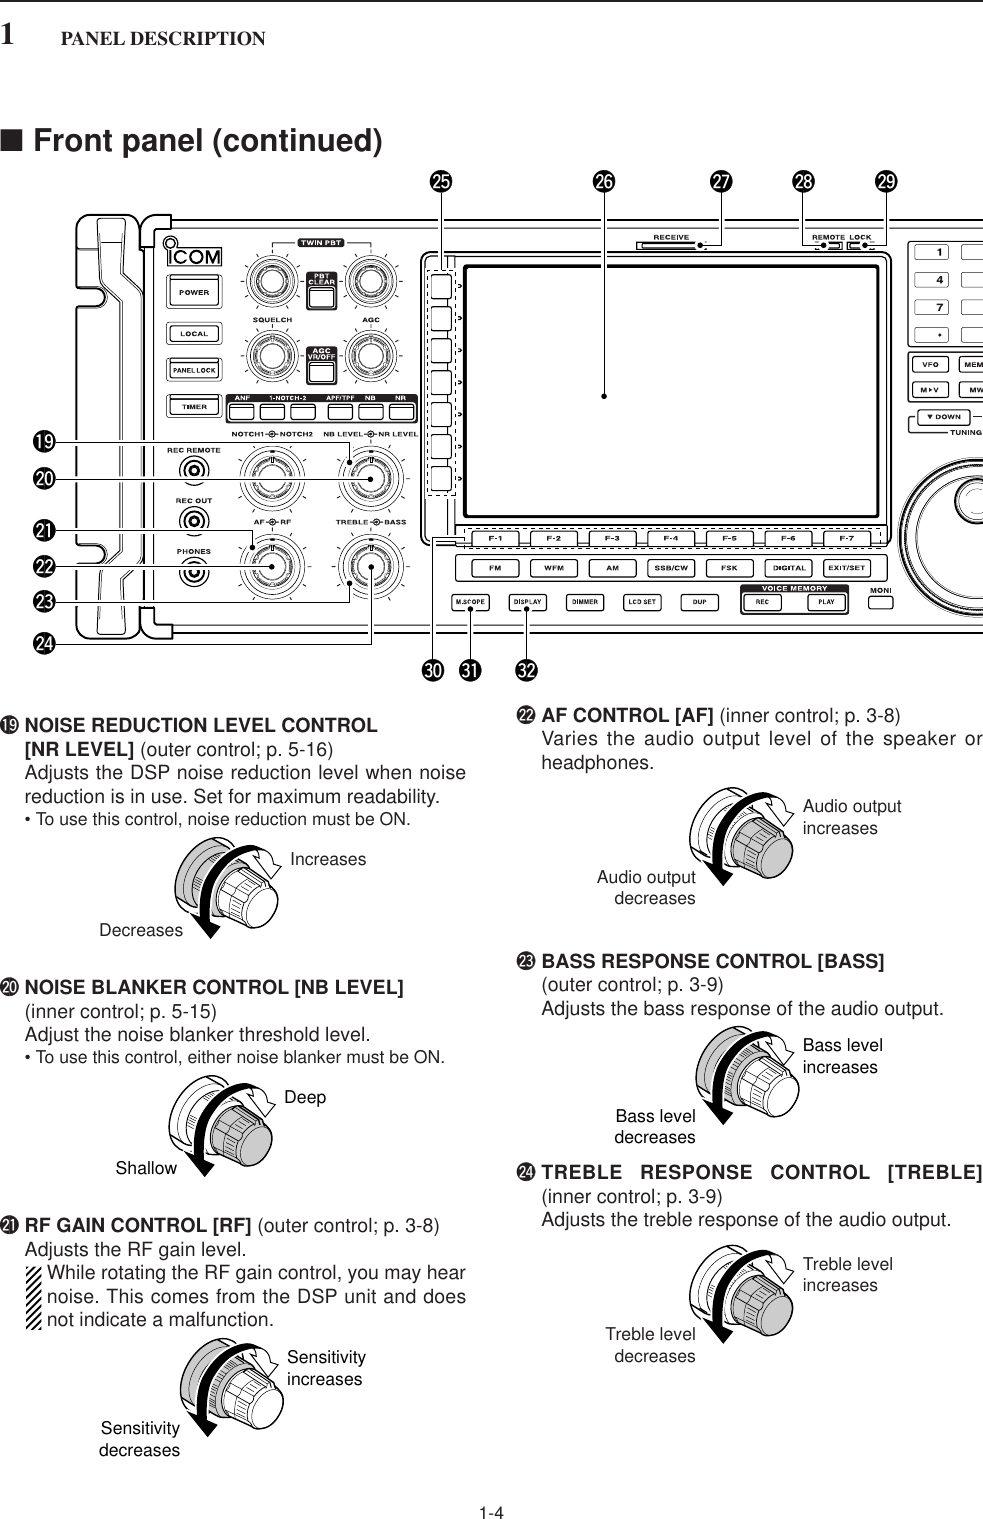 1-4■Front panel (continued)!9 NOISE REDUCTION LEVEL CONTROL[NR LEVEL] (outer control; p. 5-16)Adjusts the DSP noise reduction level when noisereduction is in use. Set for maximum readability.• To use this control, noise reduction must be ON.@0 NOISE BLANKER CONTROL [NB LEVEL](inner control; p. 5-15)Adjust the noise blanker threshold level.• To use this control, either noise blanker must be ON.@1 RF GAIN CONTROL [RF] (outer control; p. 3-8)Adjusts the RF gain level. While rotating the RF gain control, you may hearnoise. This comes from the DSP unit and doesnot indicate a malfunction.@2 AF CONTROL [AF] (inner control; p. 3-8)Varies the audio output level of the speaker orheadphones.@3 BASS RESPONSE CONTROL [BASS] (outer control; p. 3-9)Adjusts the bass response of the audio output.@4 TREBLE RESPONSE CONTROL [TREBLE] (inner control; p. 3-9)Adjusts the treble response of the audio output.Treble levelincreasesTreble leveldecreasesBass levelincreasesBass leveldecreasesAudio outputincreasesAudio outputdecreasesSensitivityincreasesSensitivitydecreasesDeepShallowIncreasesDecreases1PANEL DESCRIPTION@7@6 @8 @9#0!9@1@2@0@3@4@5#1 #2